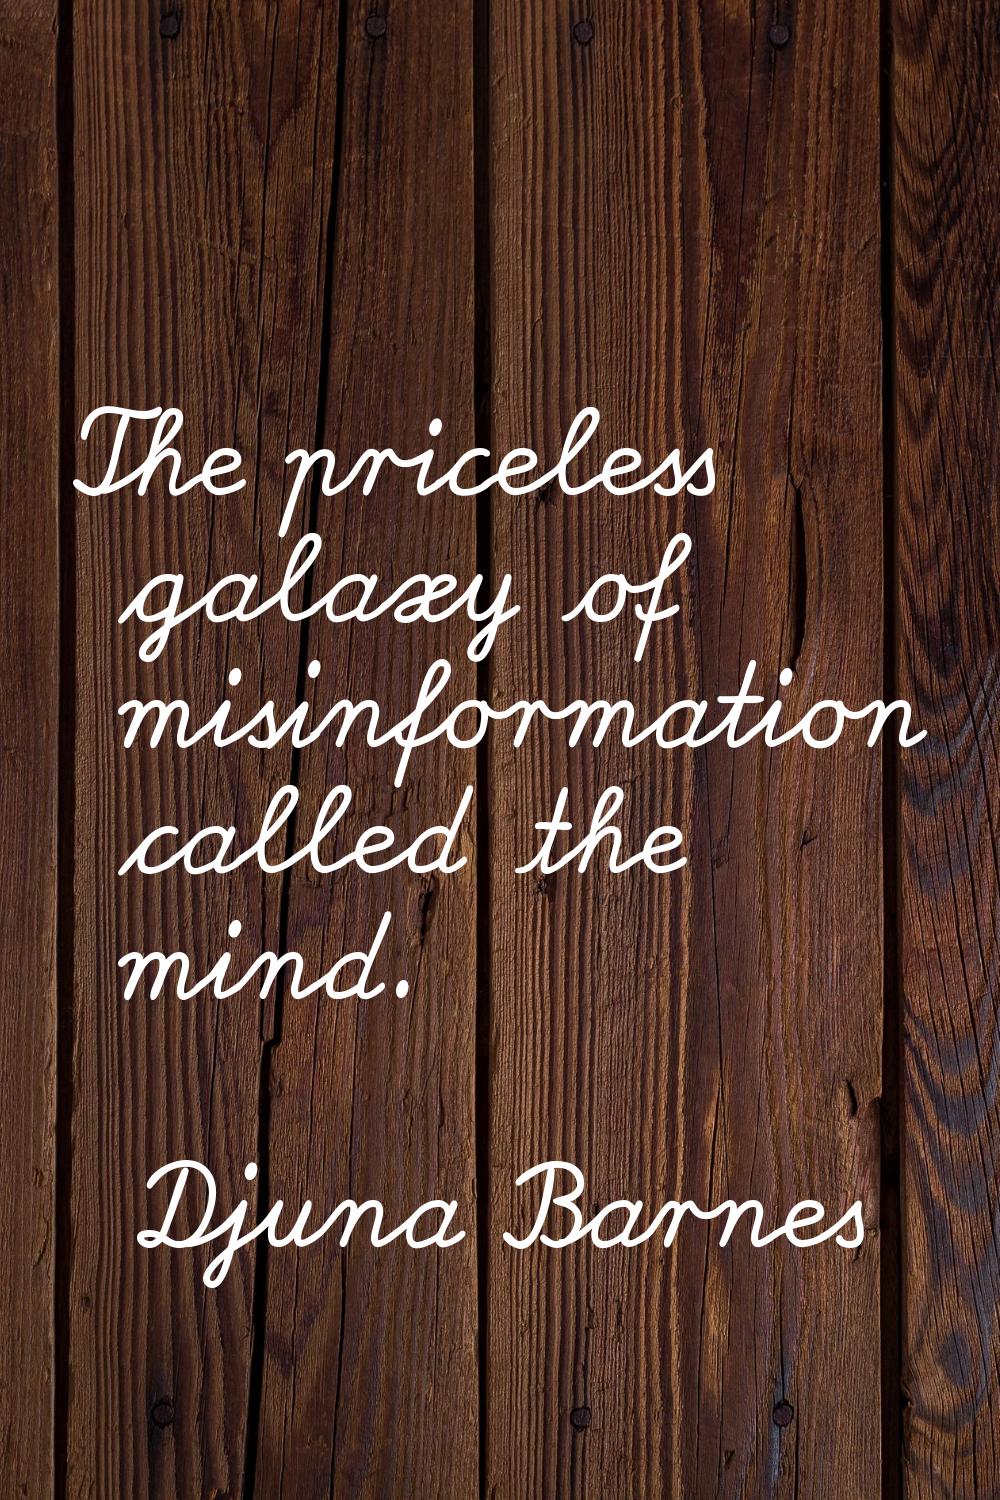 The priceless galaxy of misinformation called the mind.